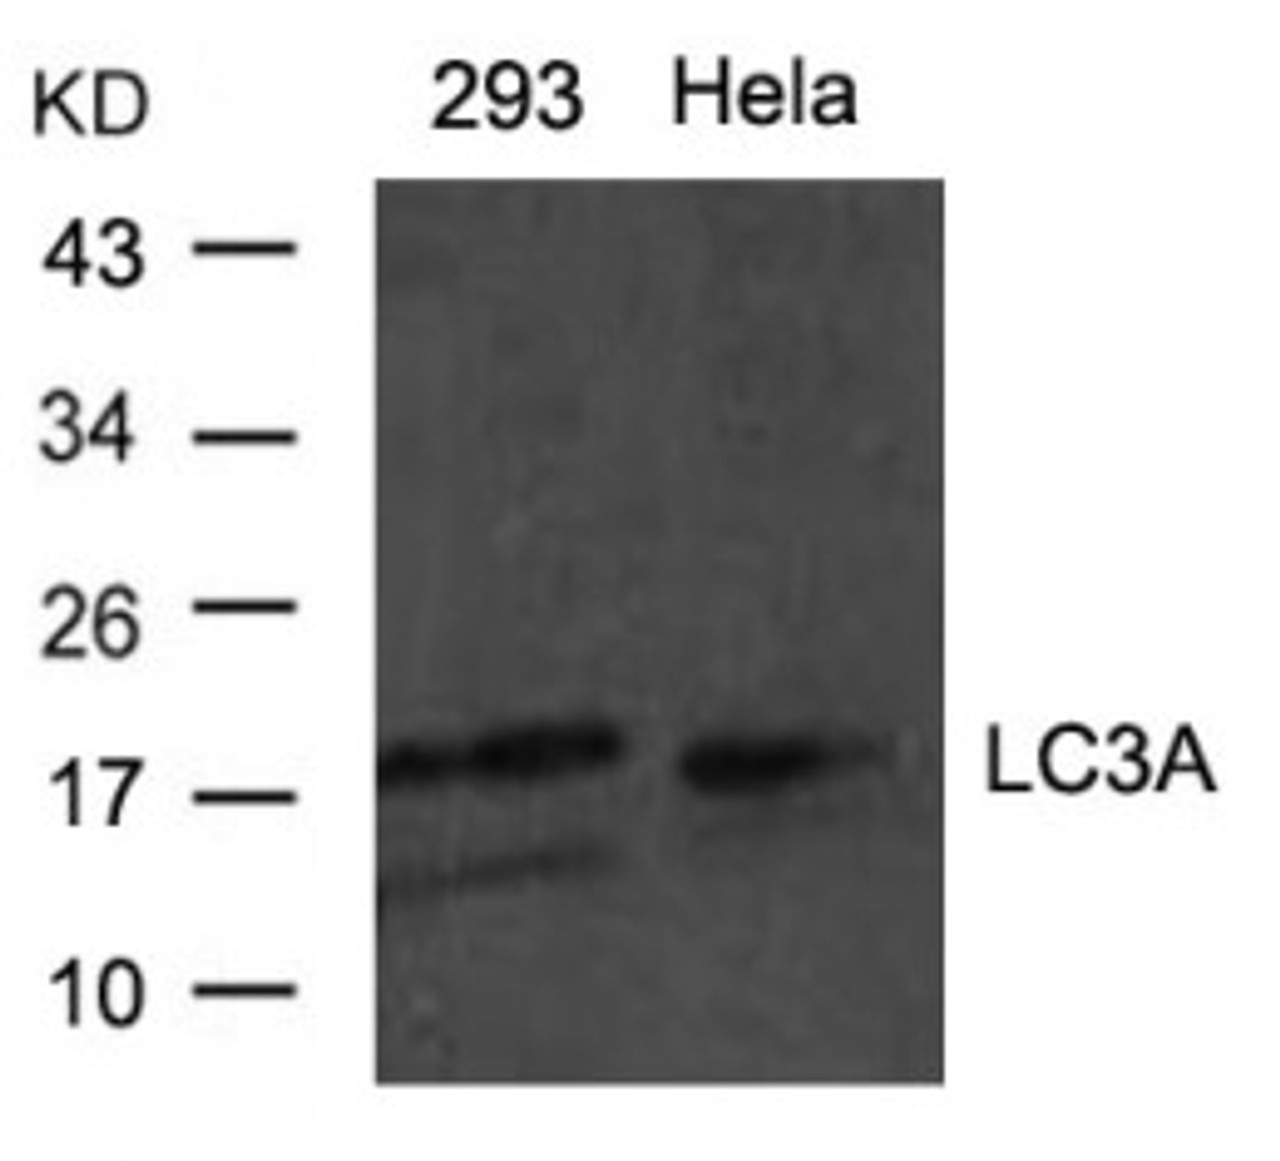 Western blot analysis of lysed extracts from HeLa and 293 cells using LC3A Antibody.